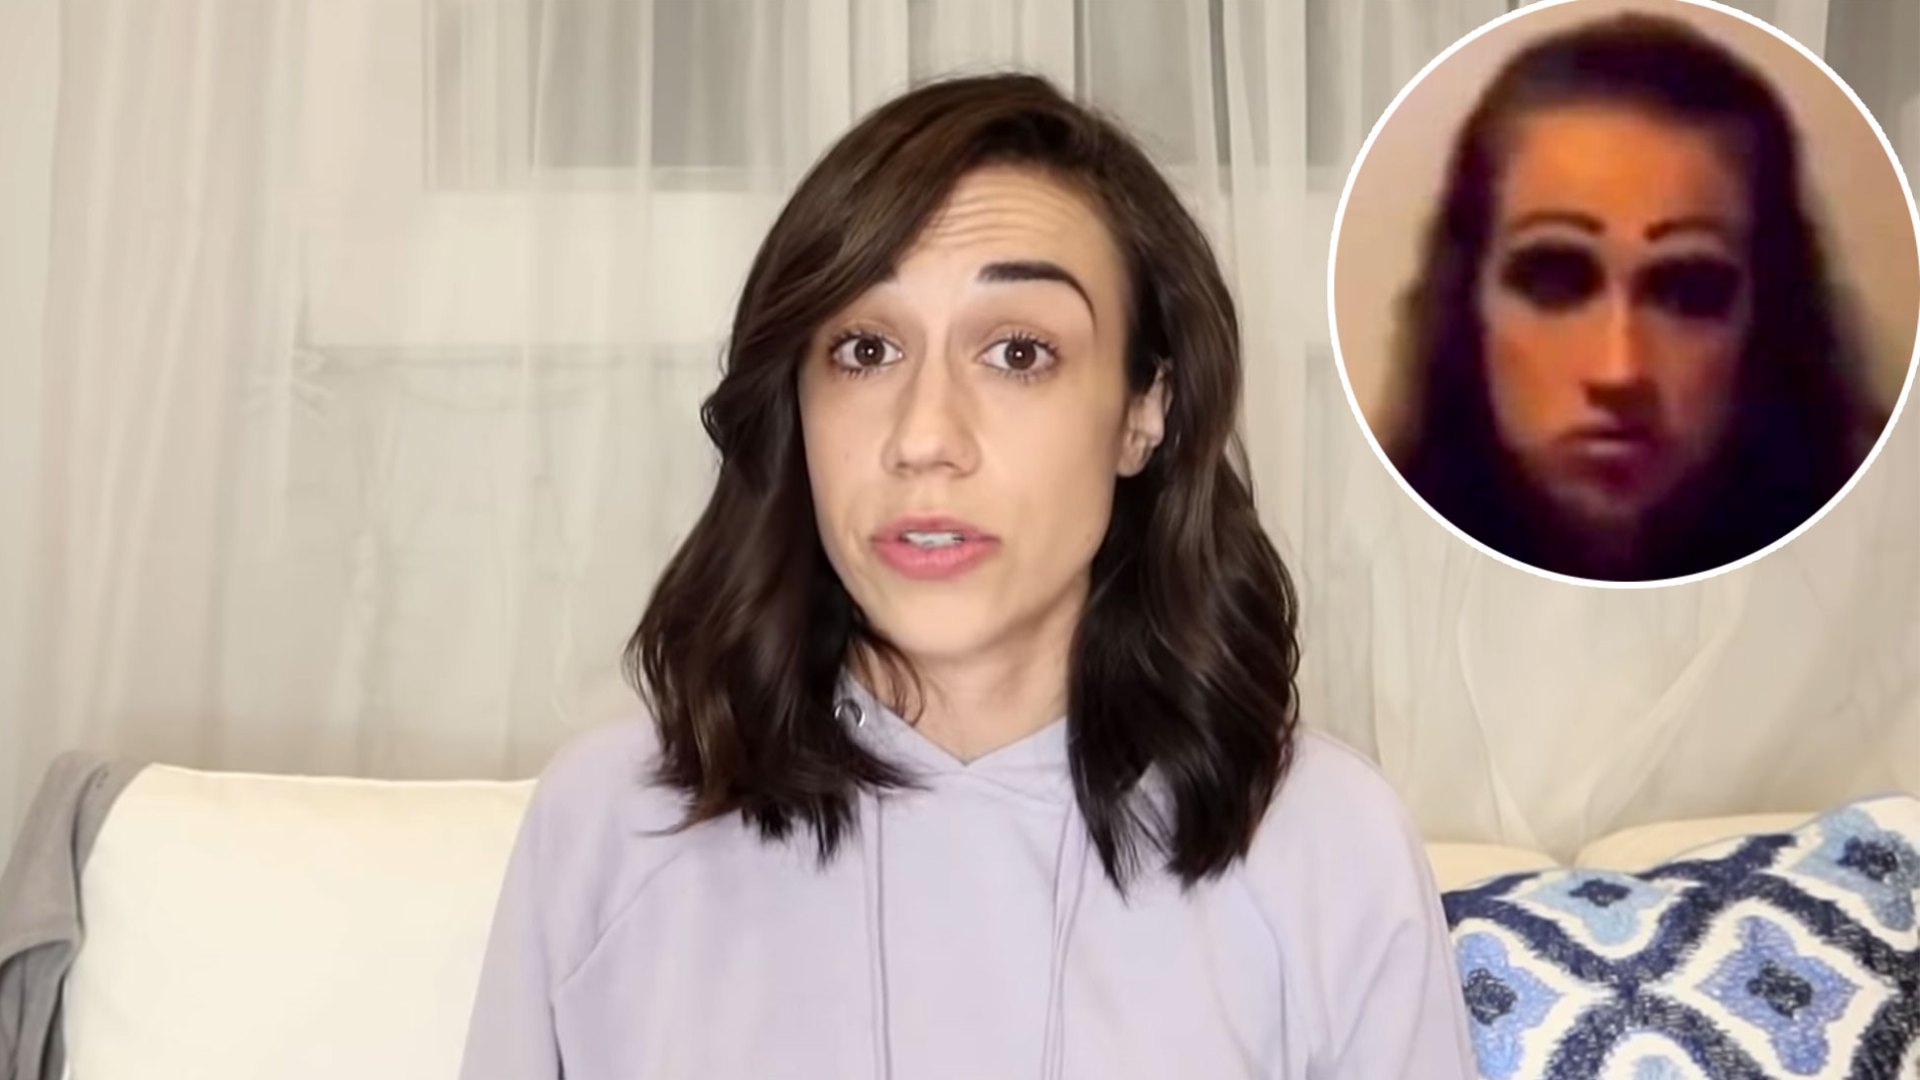 YouTuber Colleen Ballinger Apologizes for Resurfaced Racist Video | In ...